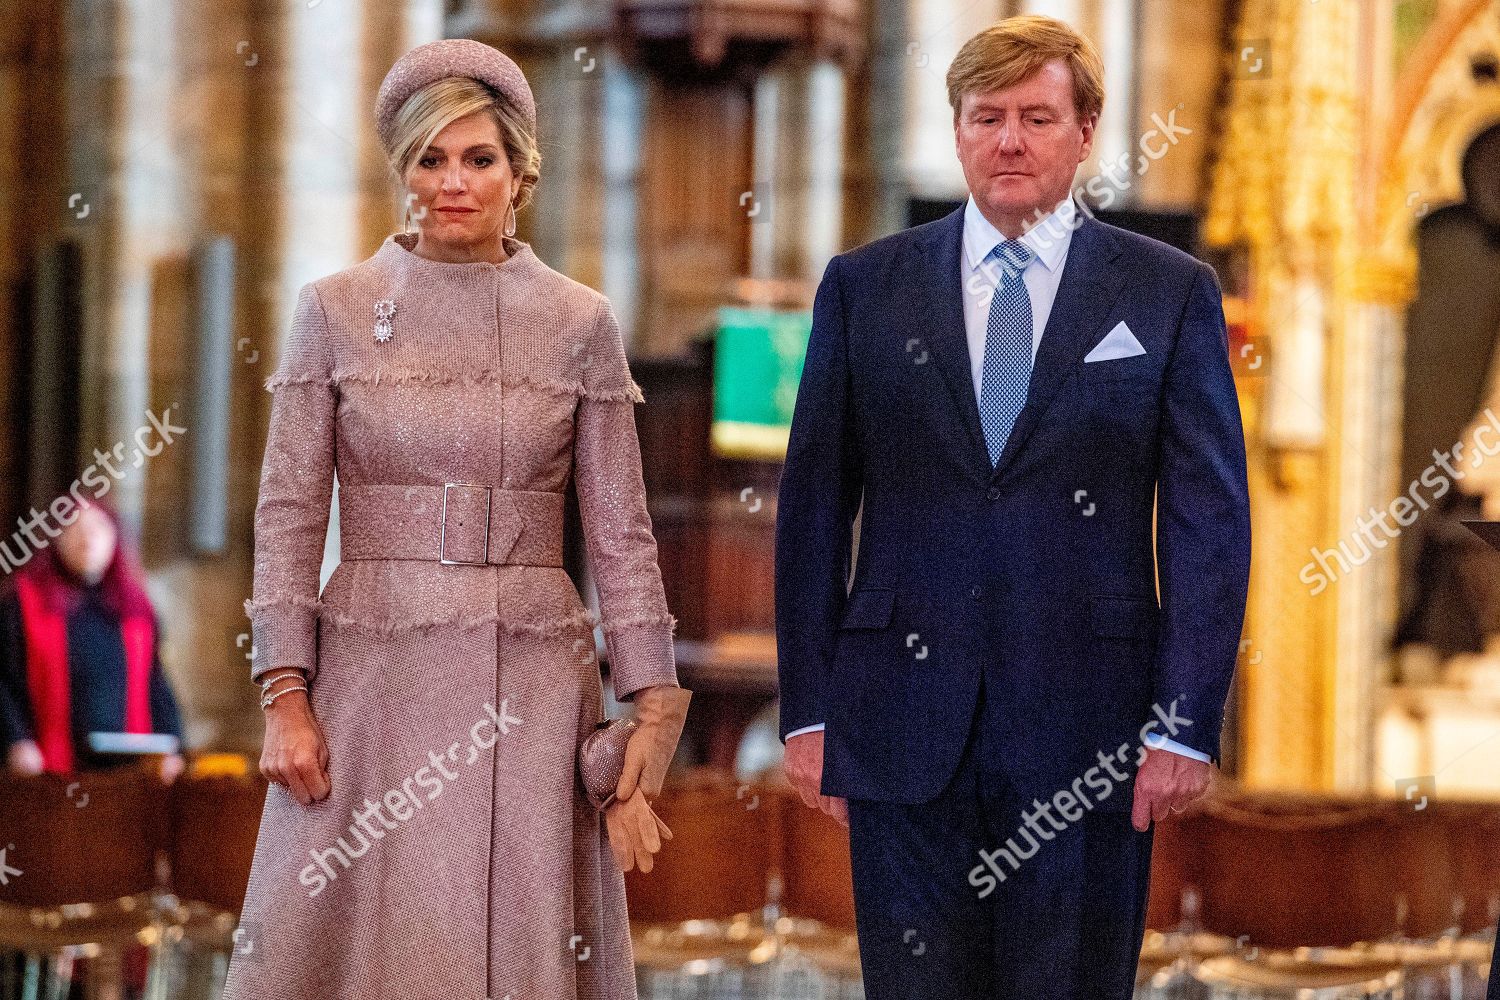 state-visit-of-the-king-and-queen-of-the-netherlands-london-uk-shutterstock-editorial-9942301de.jpg